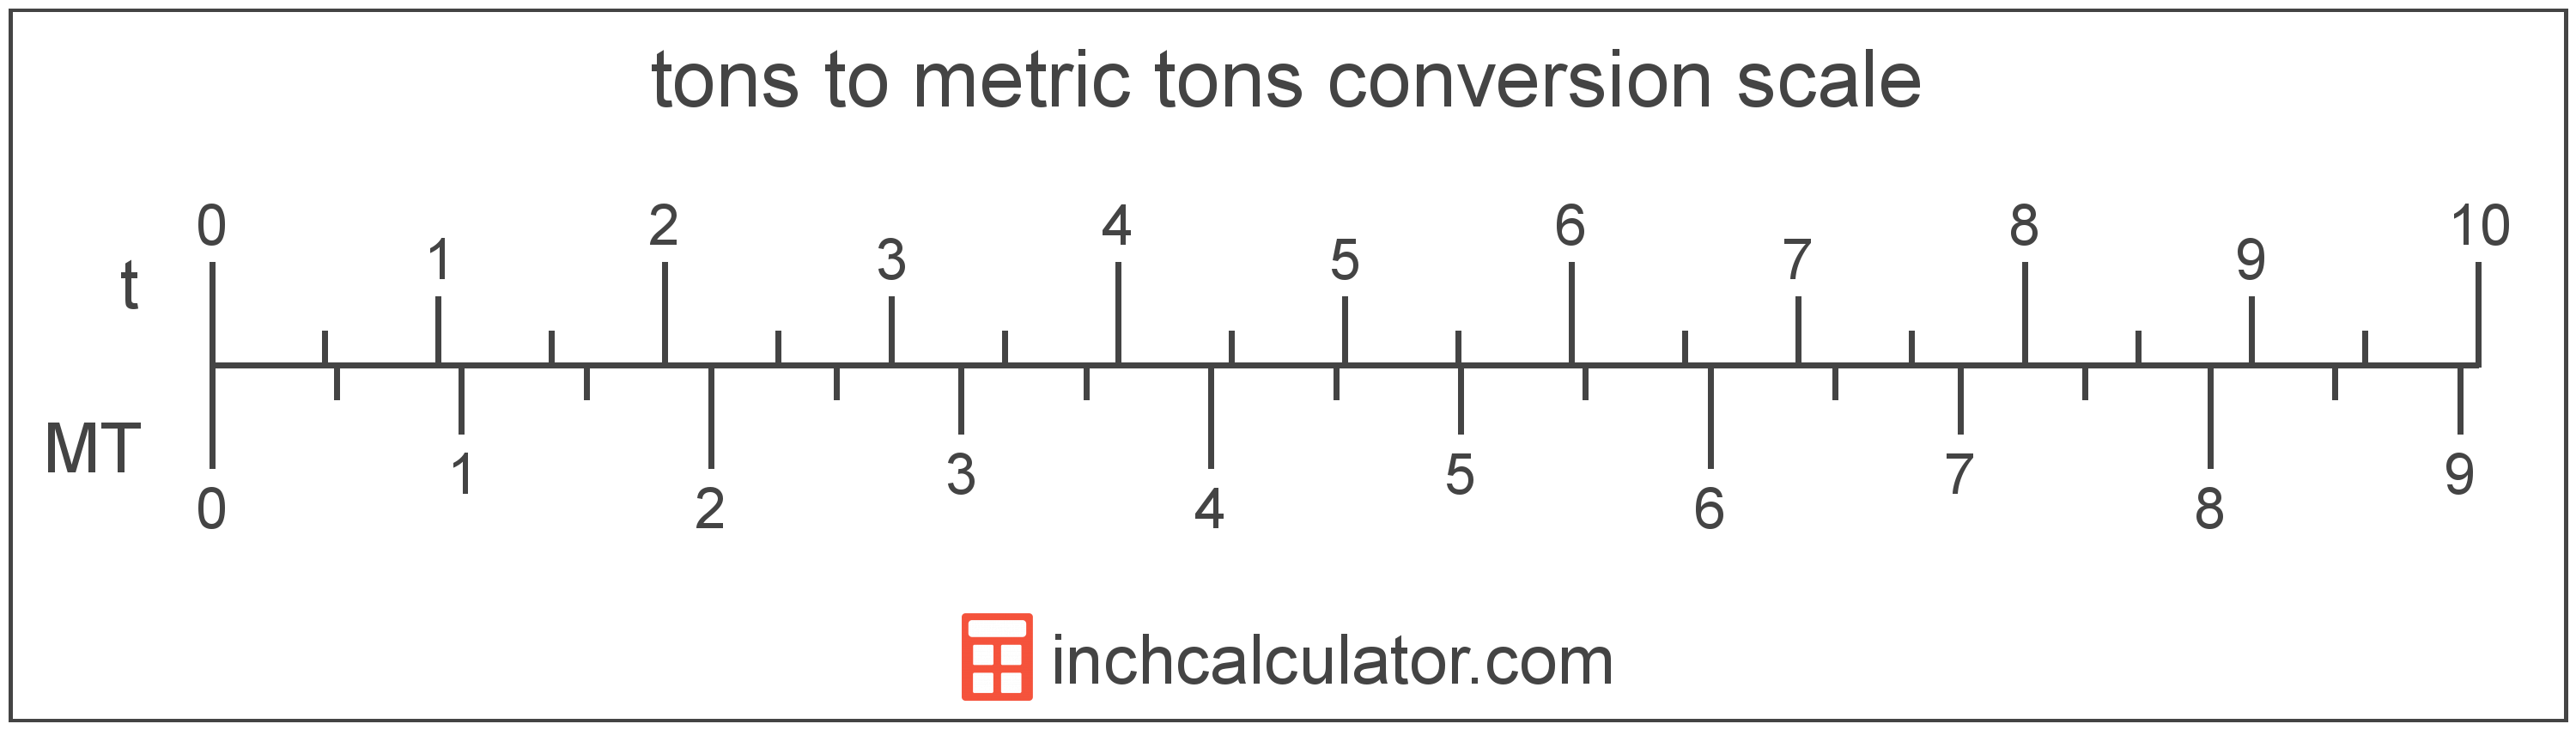 conversion scale showing metric tons and equivalent tons weight values